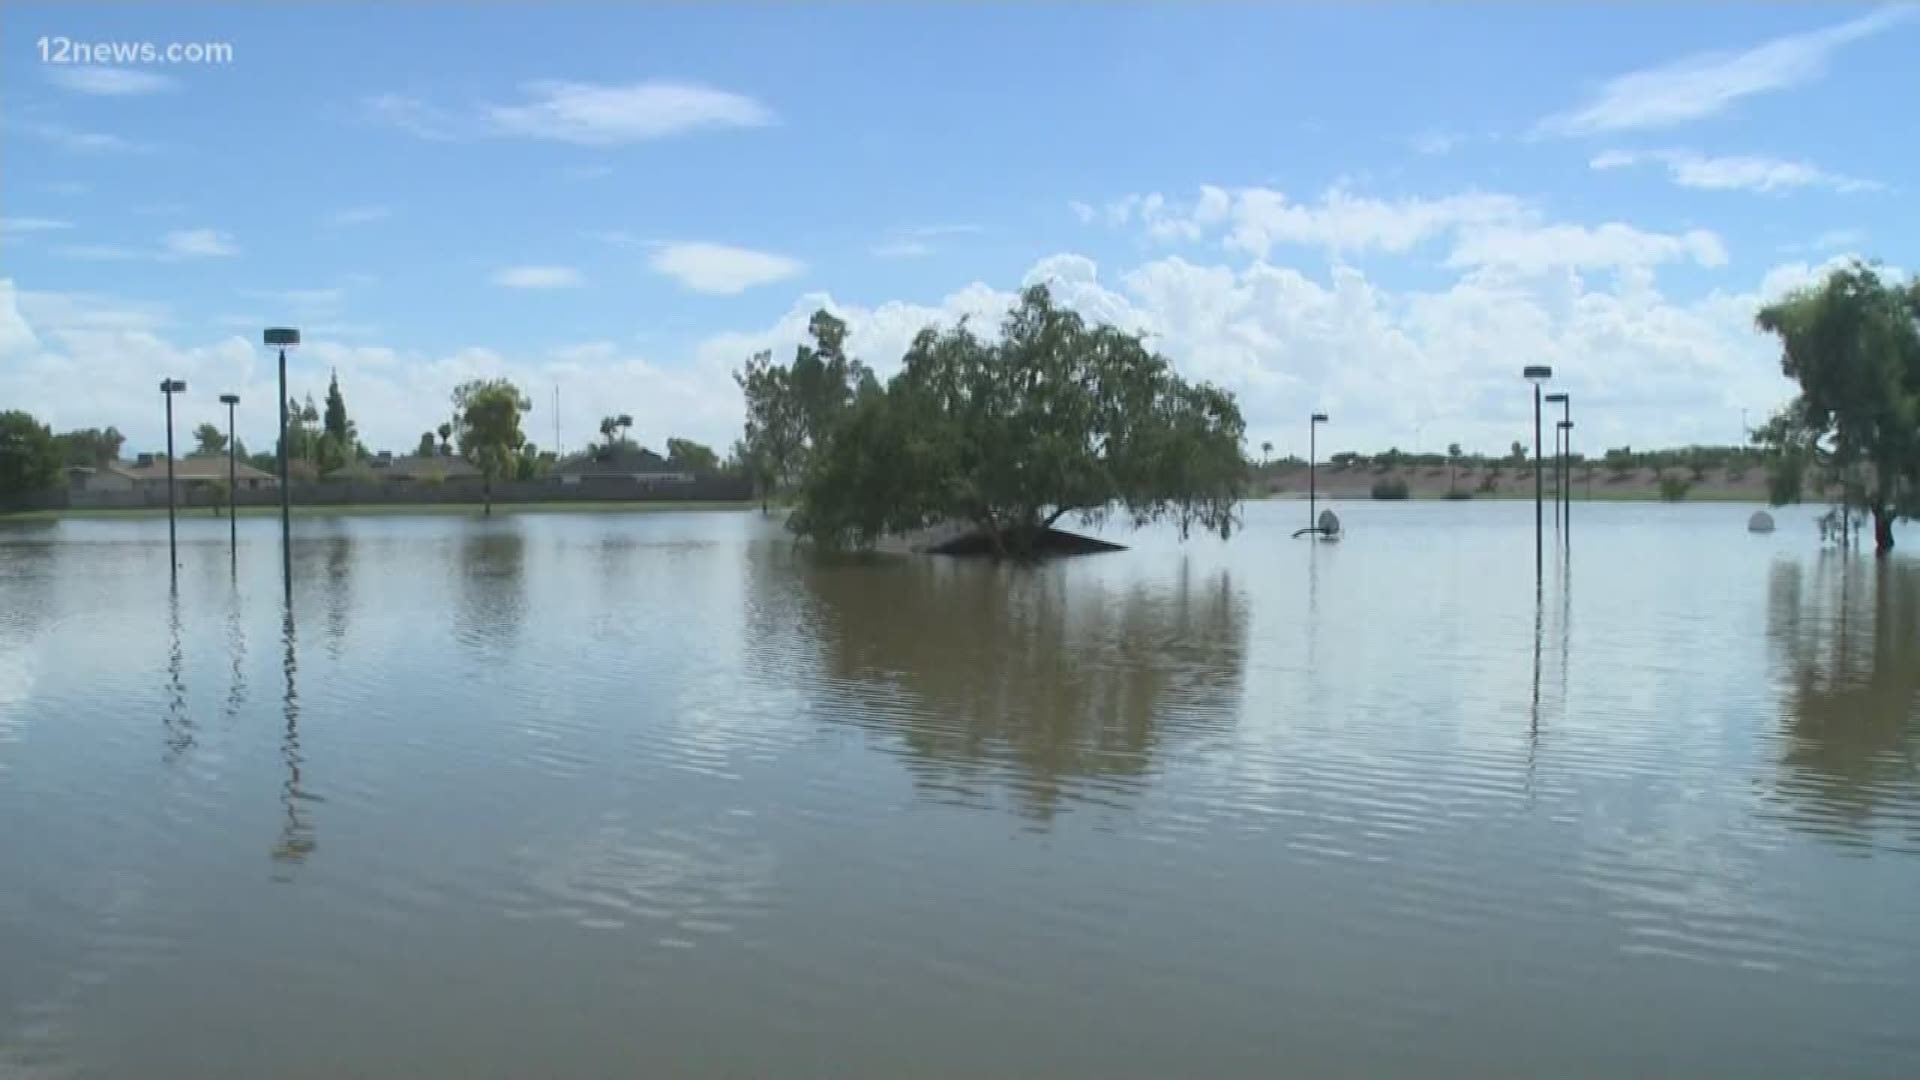 Nearly 100 homeowners are hoping the city of Mesa and ADOT will pay for damages caused by floodwaters in 2014. Team 12's Trisha Hendricks has the latest.